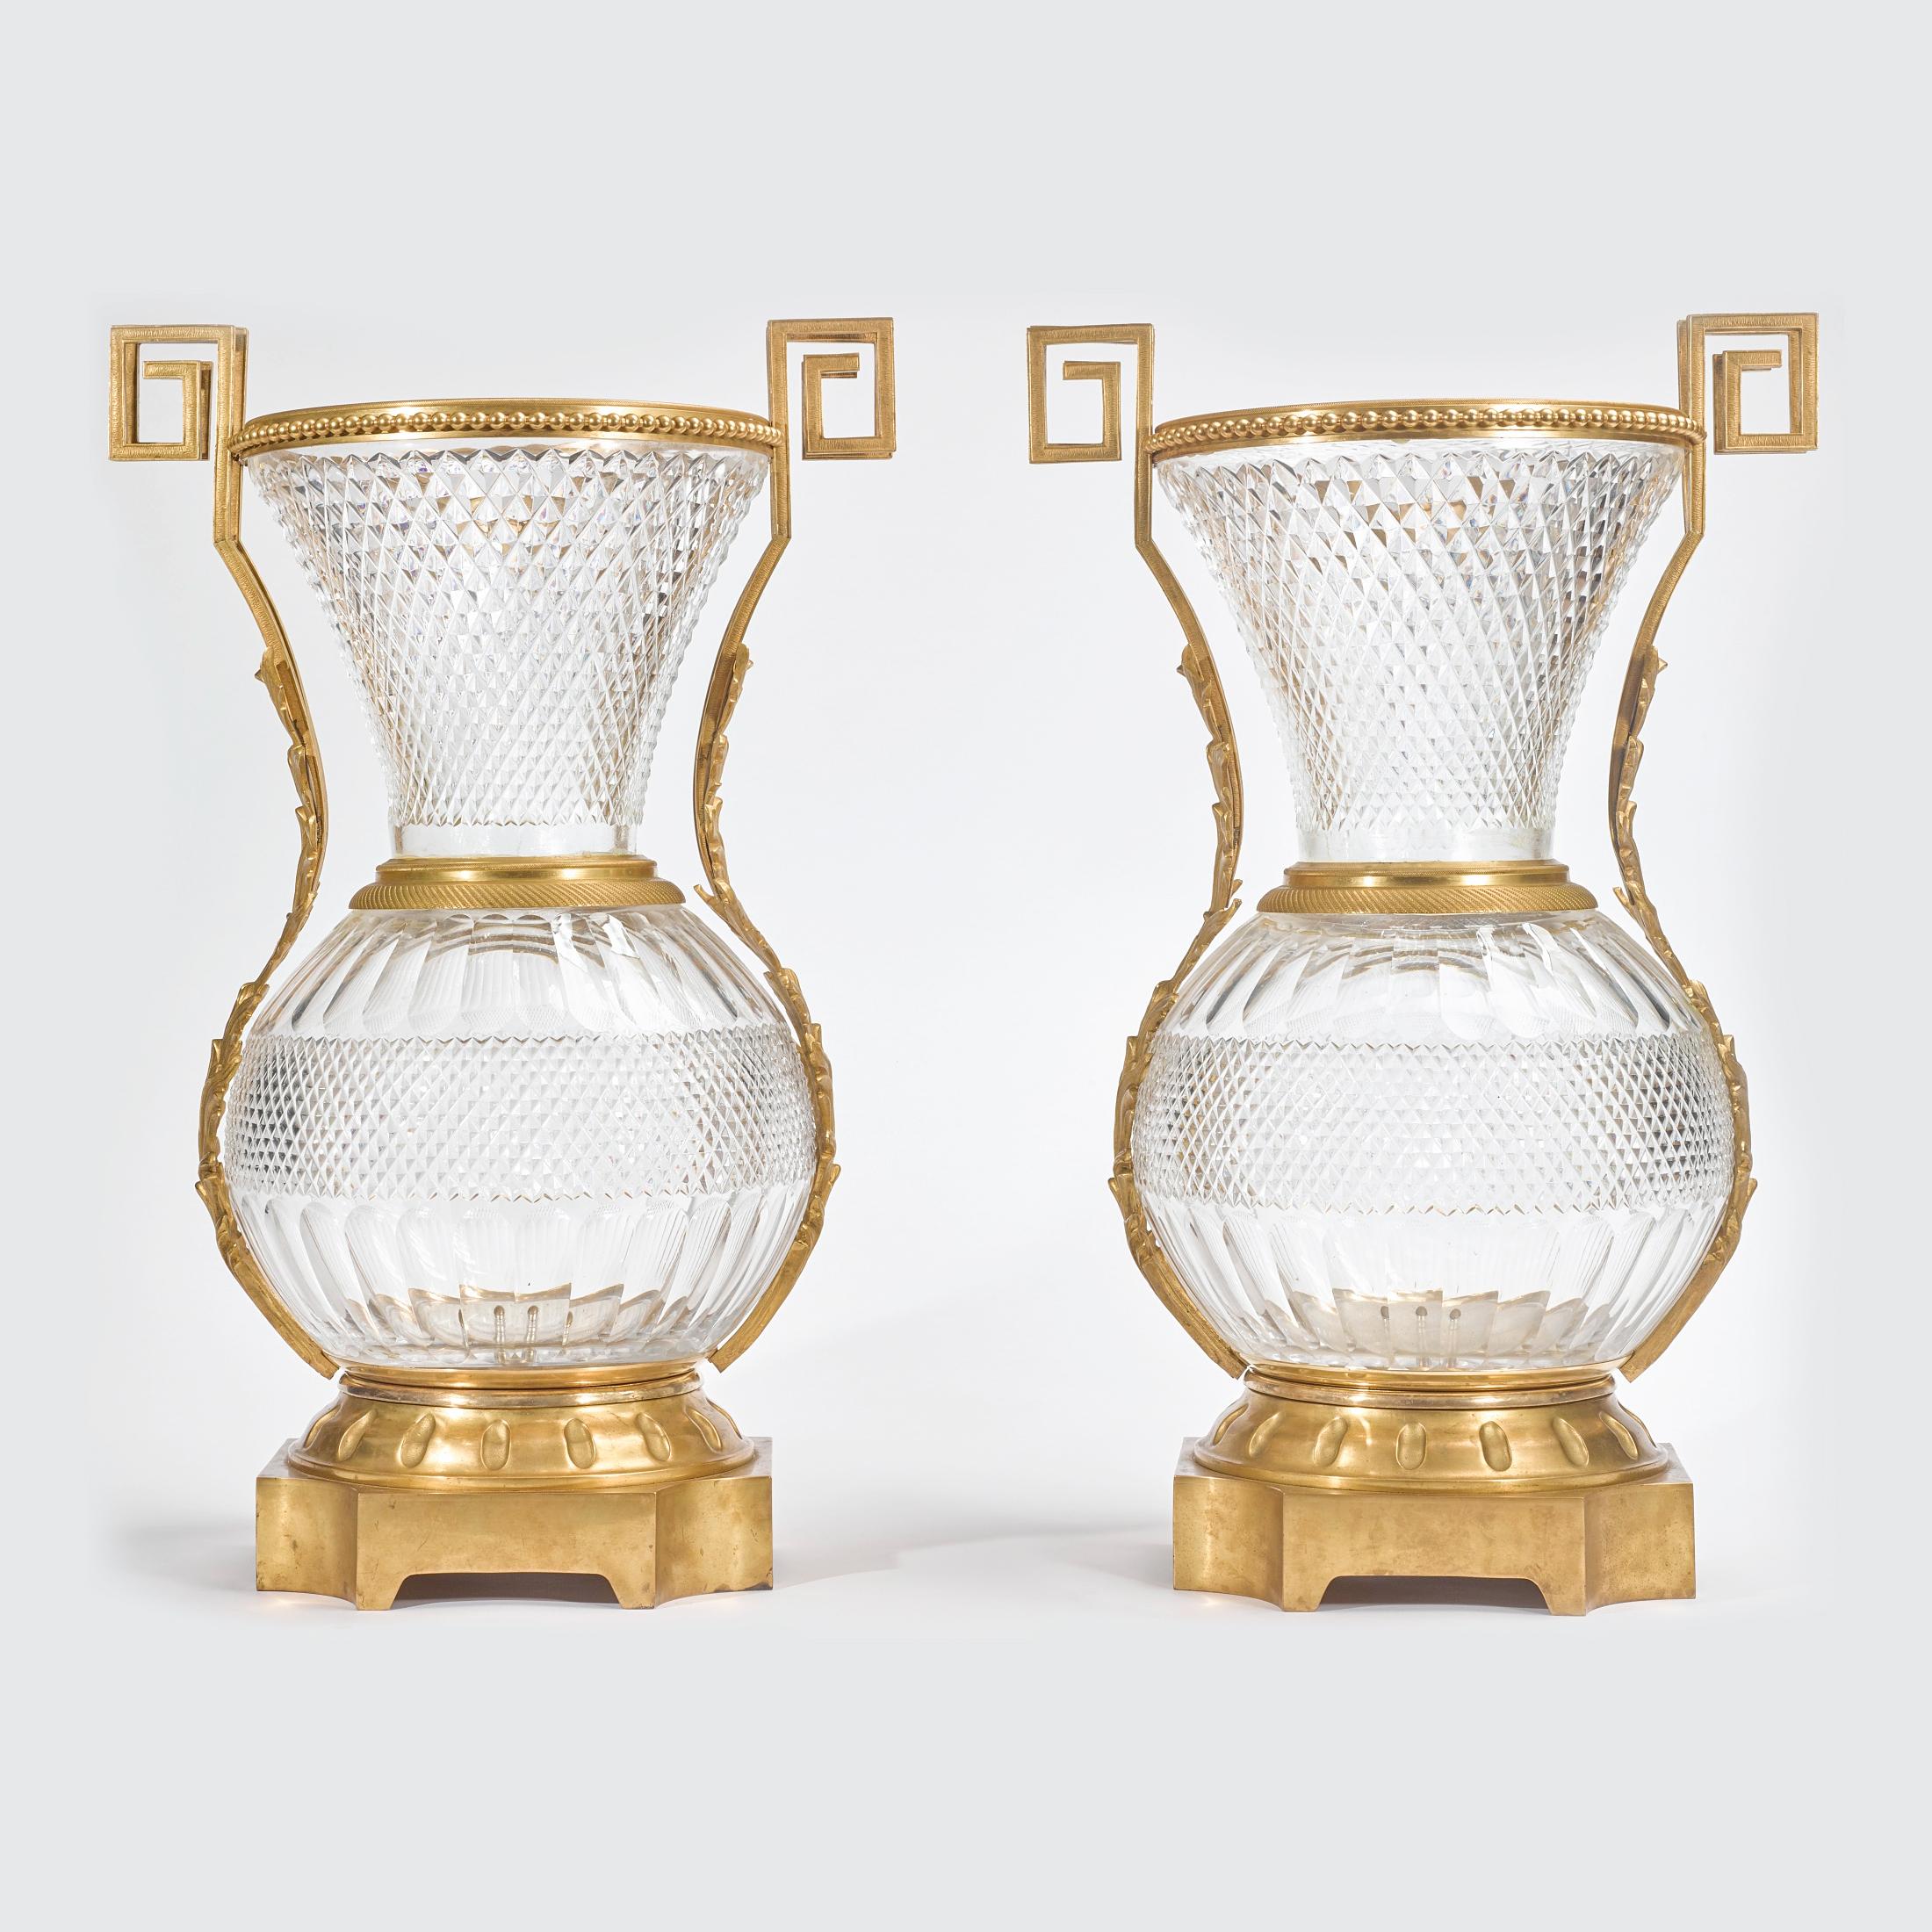 A Fine Quality Pair of Very Large French Ormolu-Mounted Cut Crystal Vases

Origin: French
Date: Early 20th century
Dimension: 28 in. x 17 1/2 in.